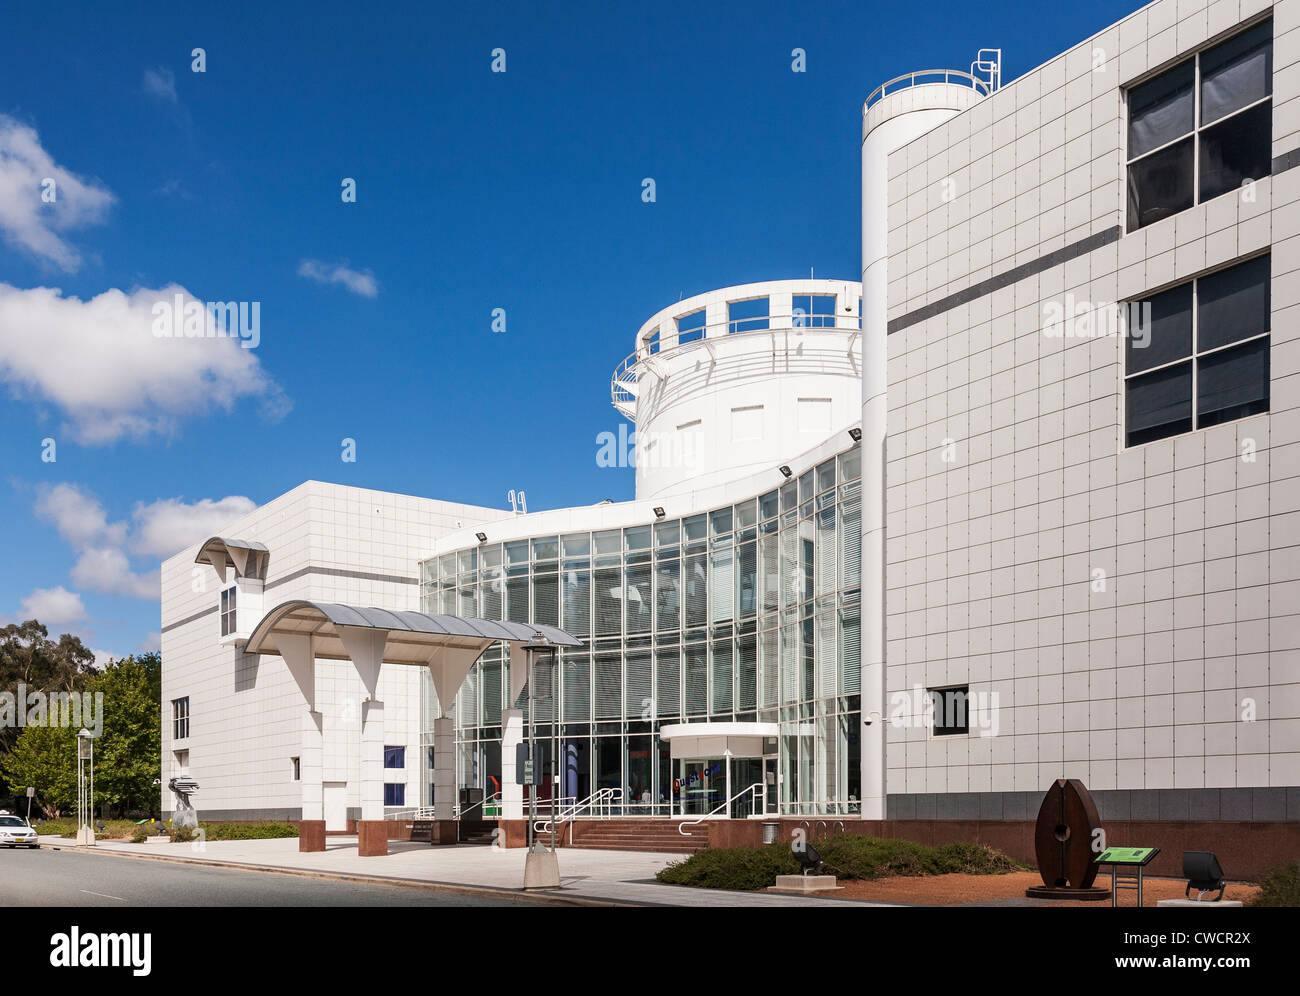 Questacon, National Science and Technology Center, Canberra, Australia, ingresso. Foto Stock